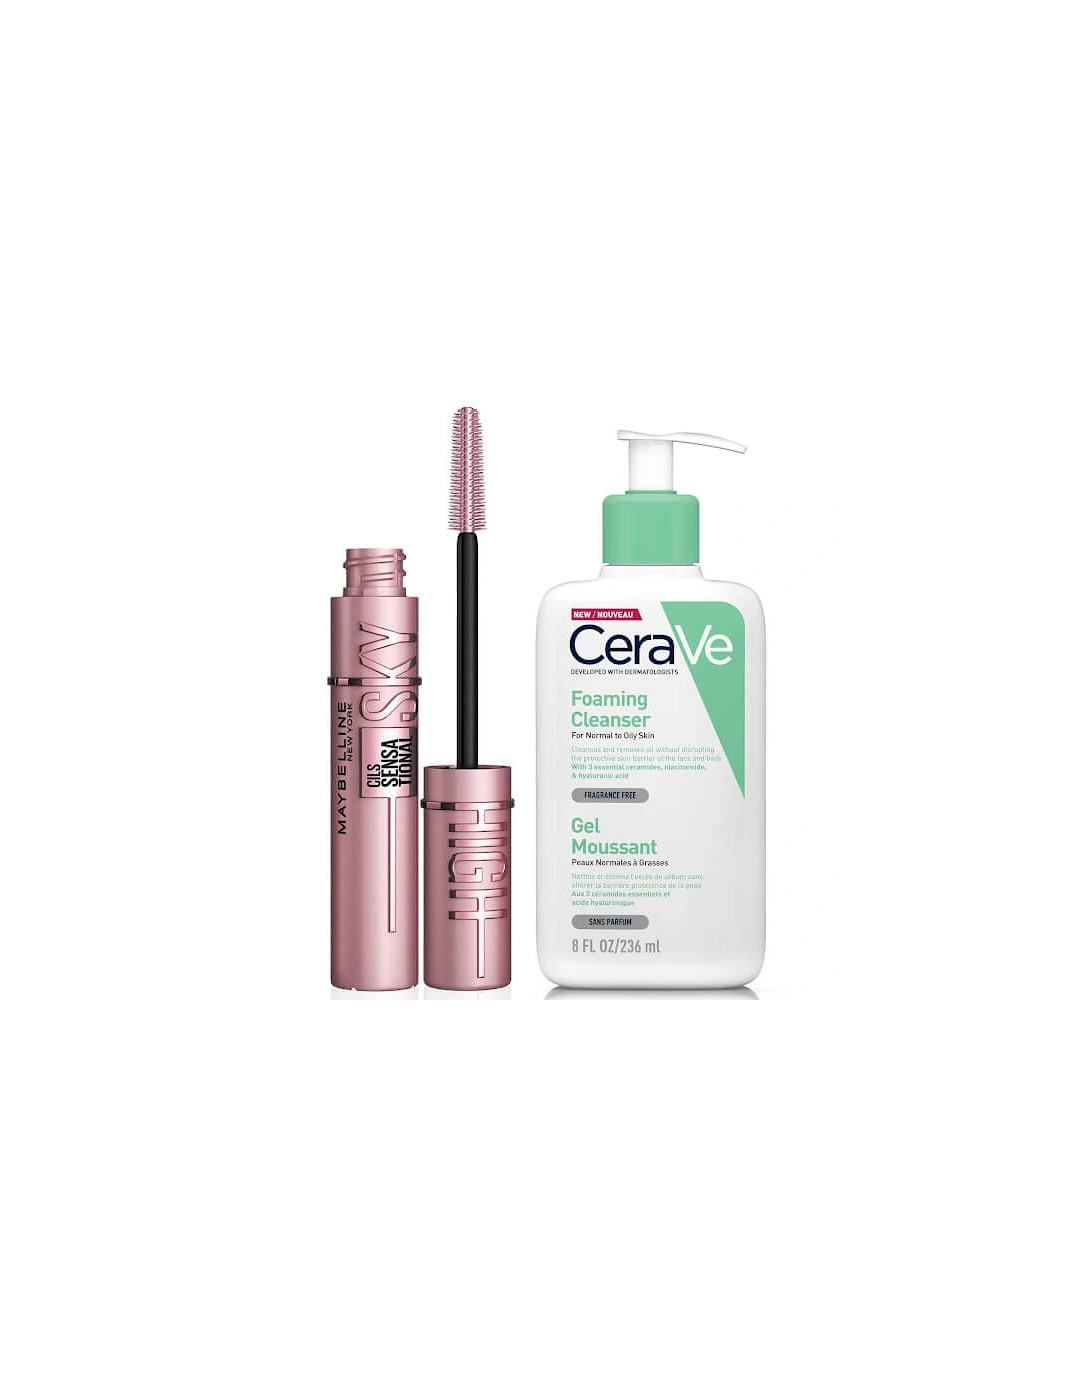 CeraVe Foaming Cleanser and Sky High Mascara Duo for Oily Skin, 2 of 1